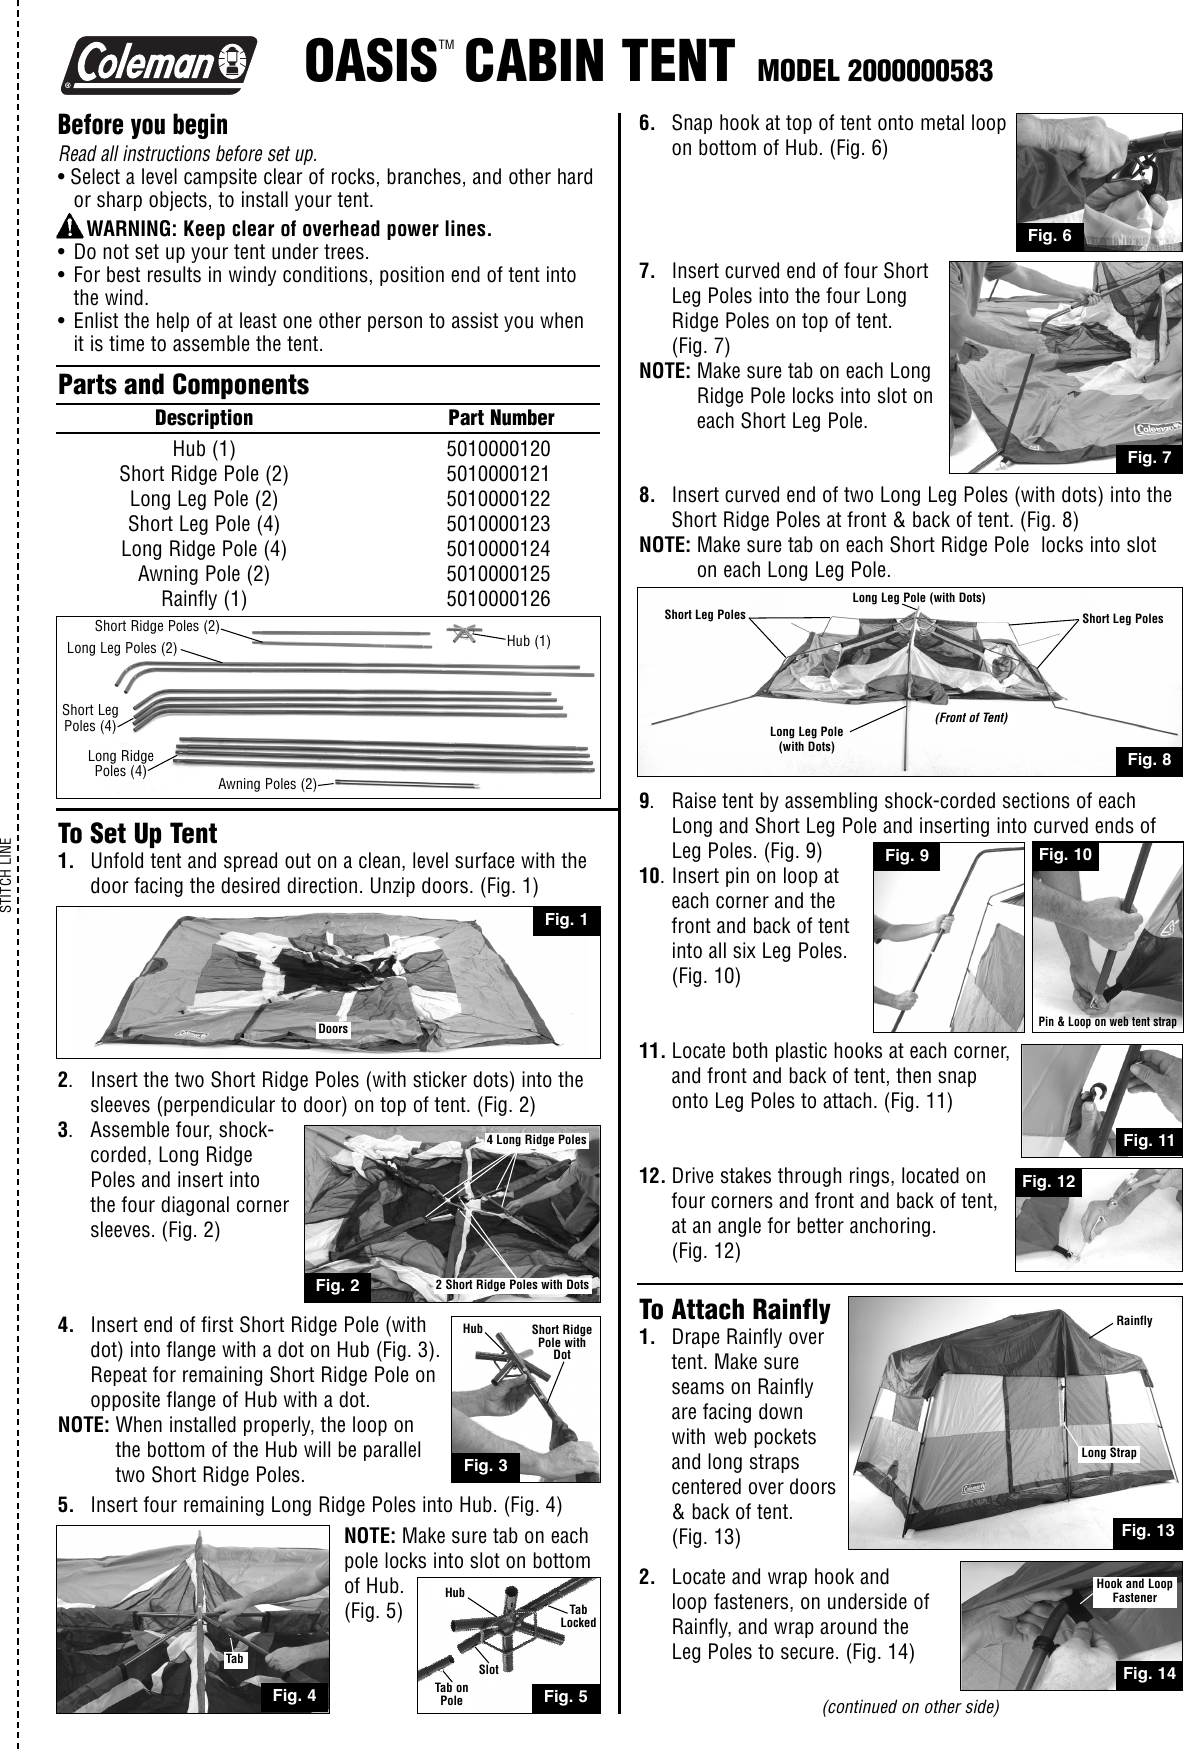 Page 1 of 2 - Coleman Coleman-2000000583-Users-Manual- 2000000583 - OASIS CABIN TENT  Coleman-2000000583-users-manual